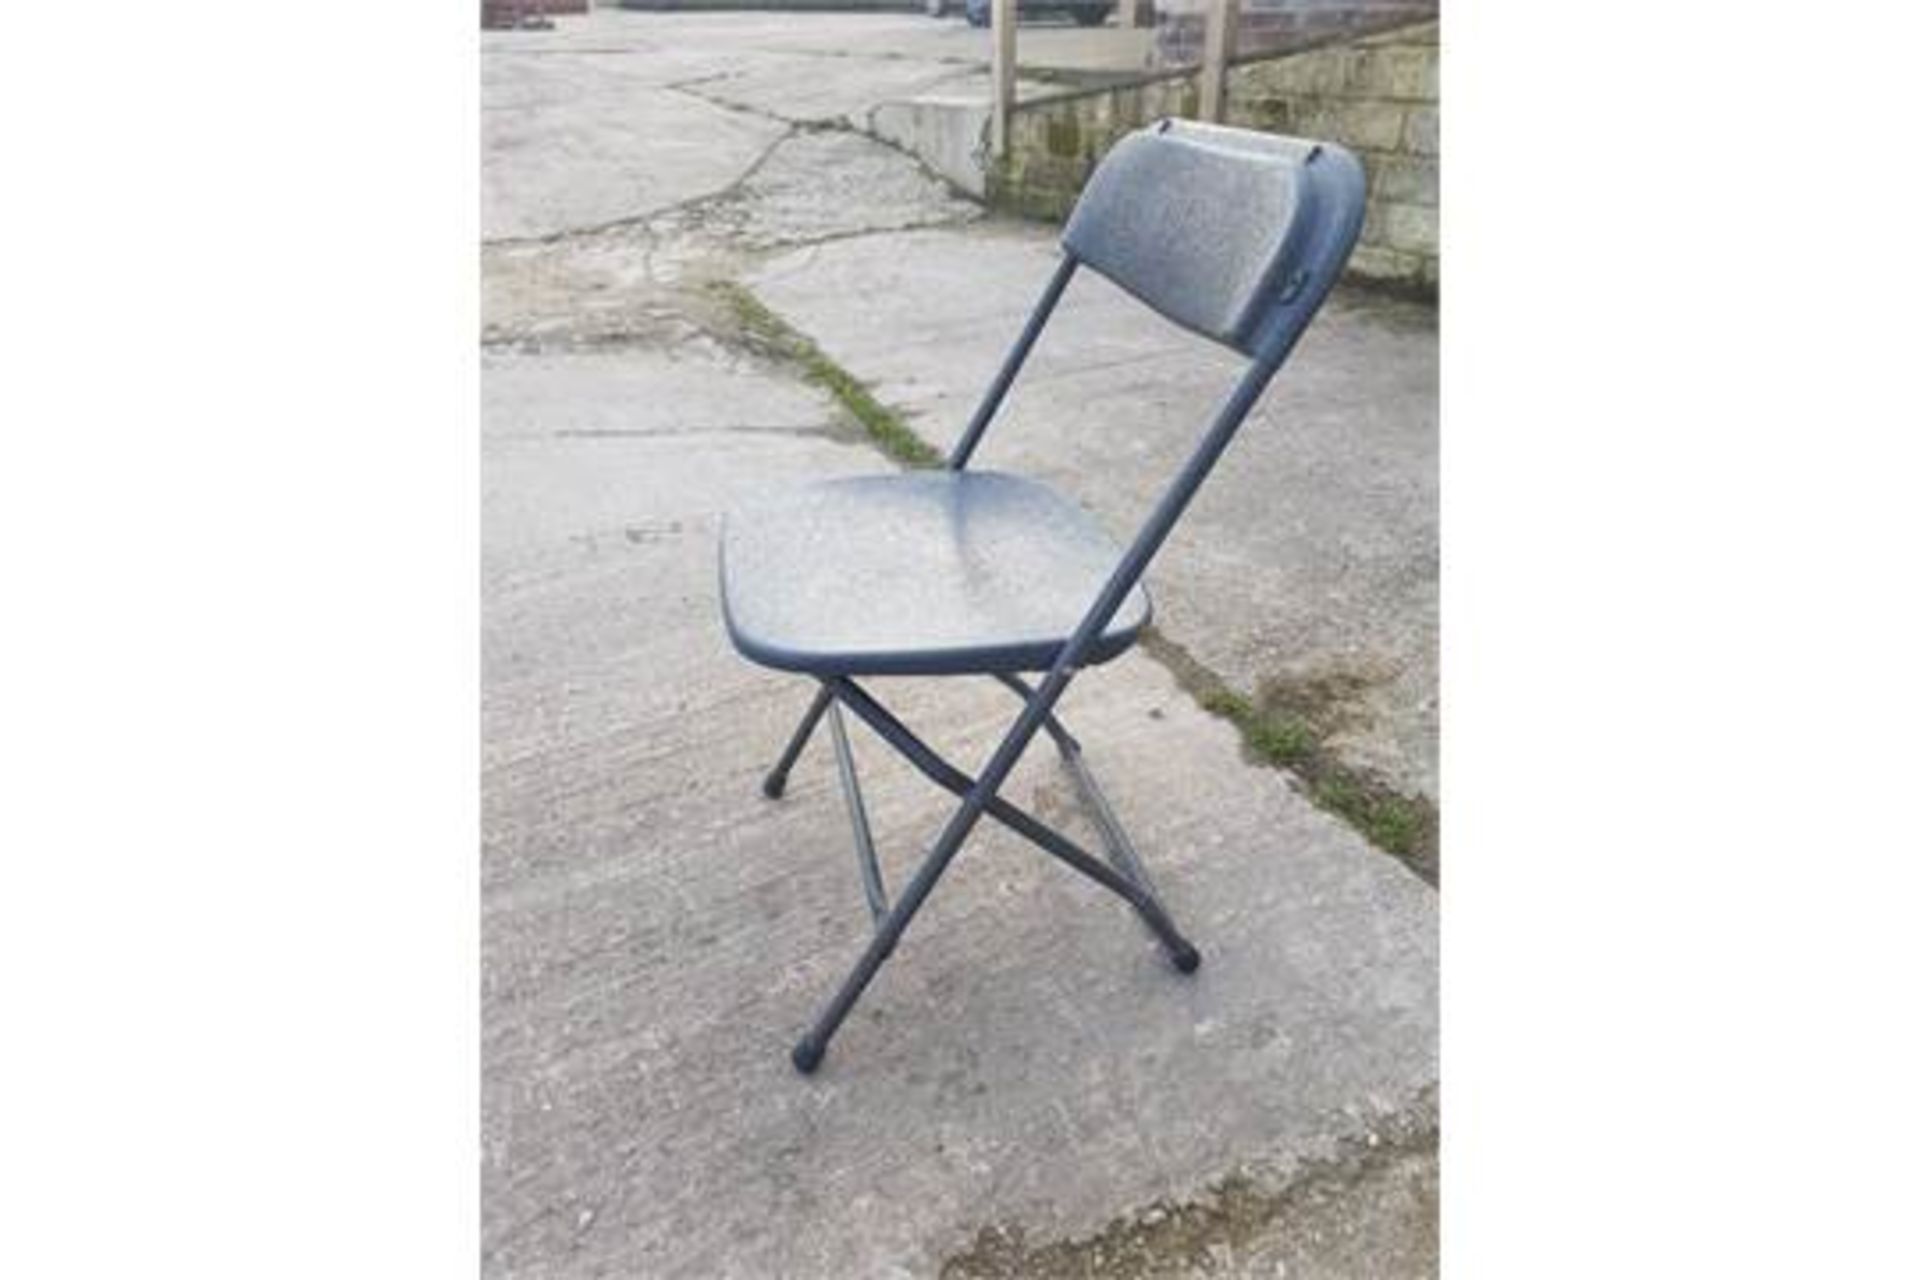 Lot of 40 x Used Fold Up Banqueting Chairs  - Good Condition – NO VAT - Image 2 of 3